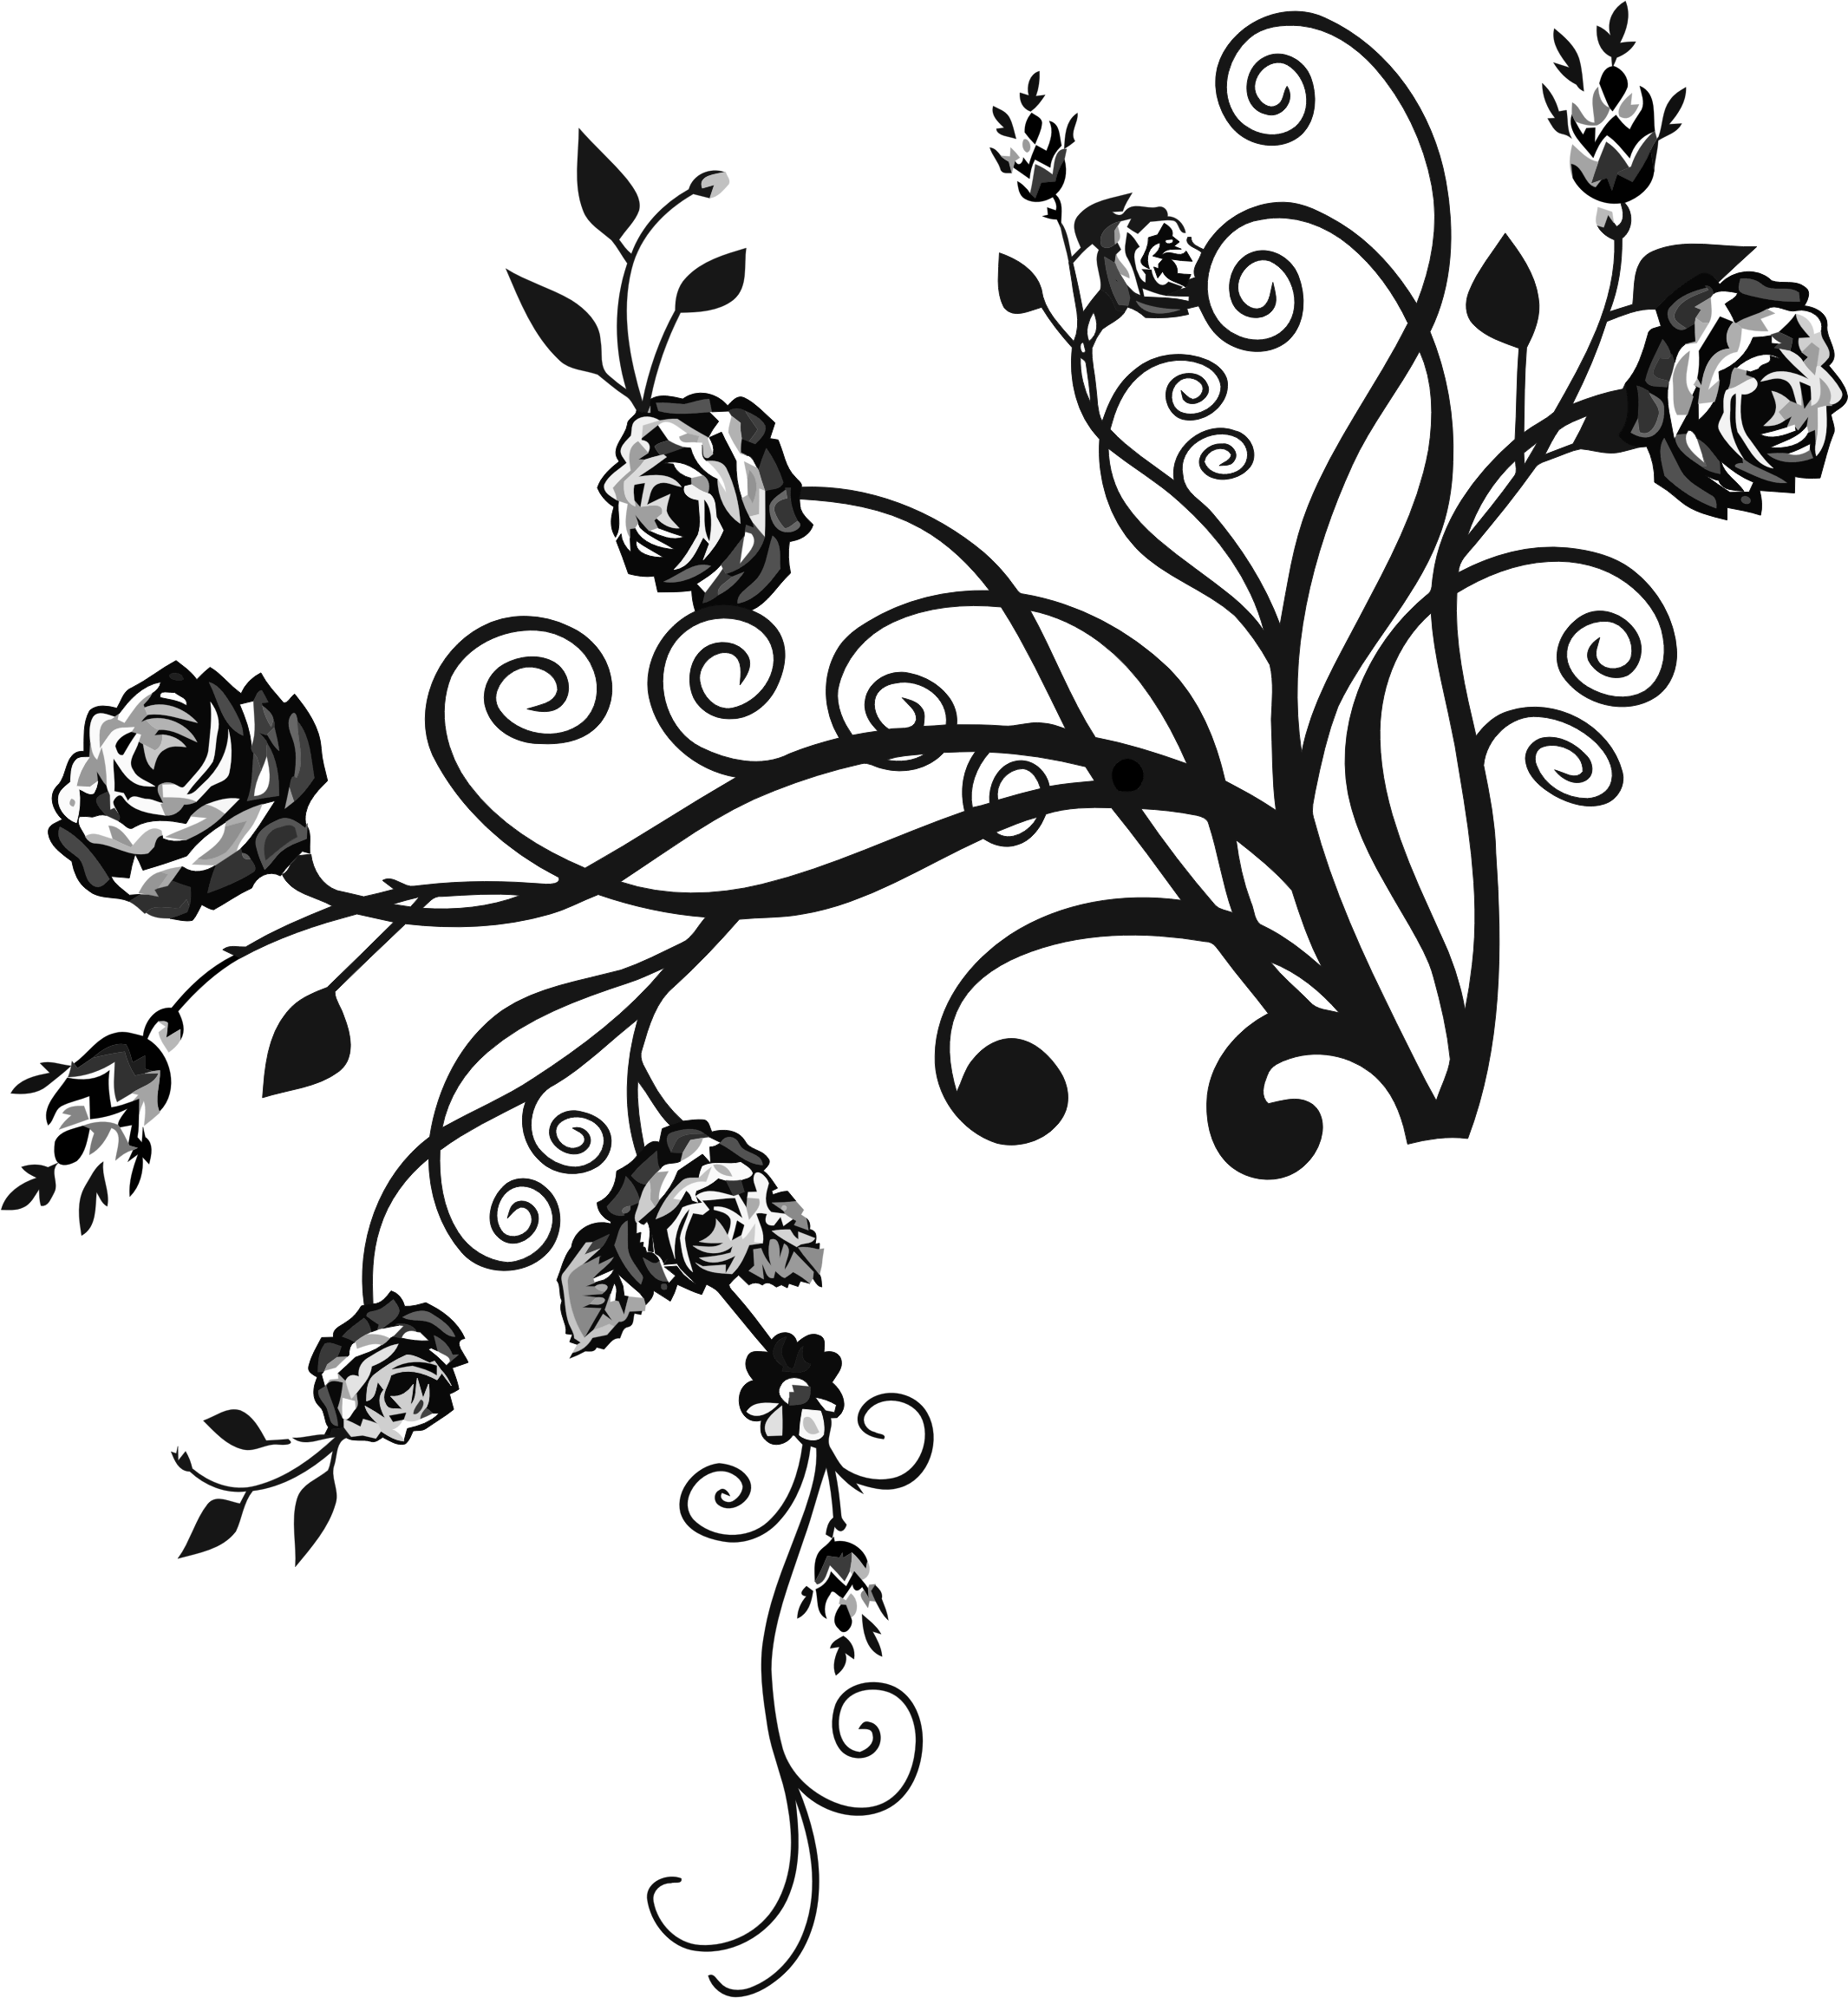 Download Flourish Big Image Png Floral Flourish Png Image With No Background Pngkey Com